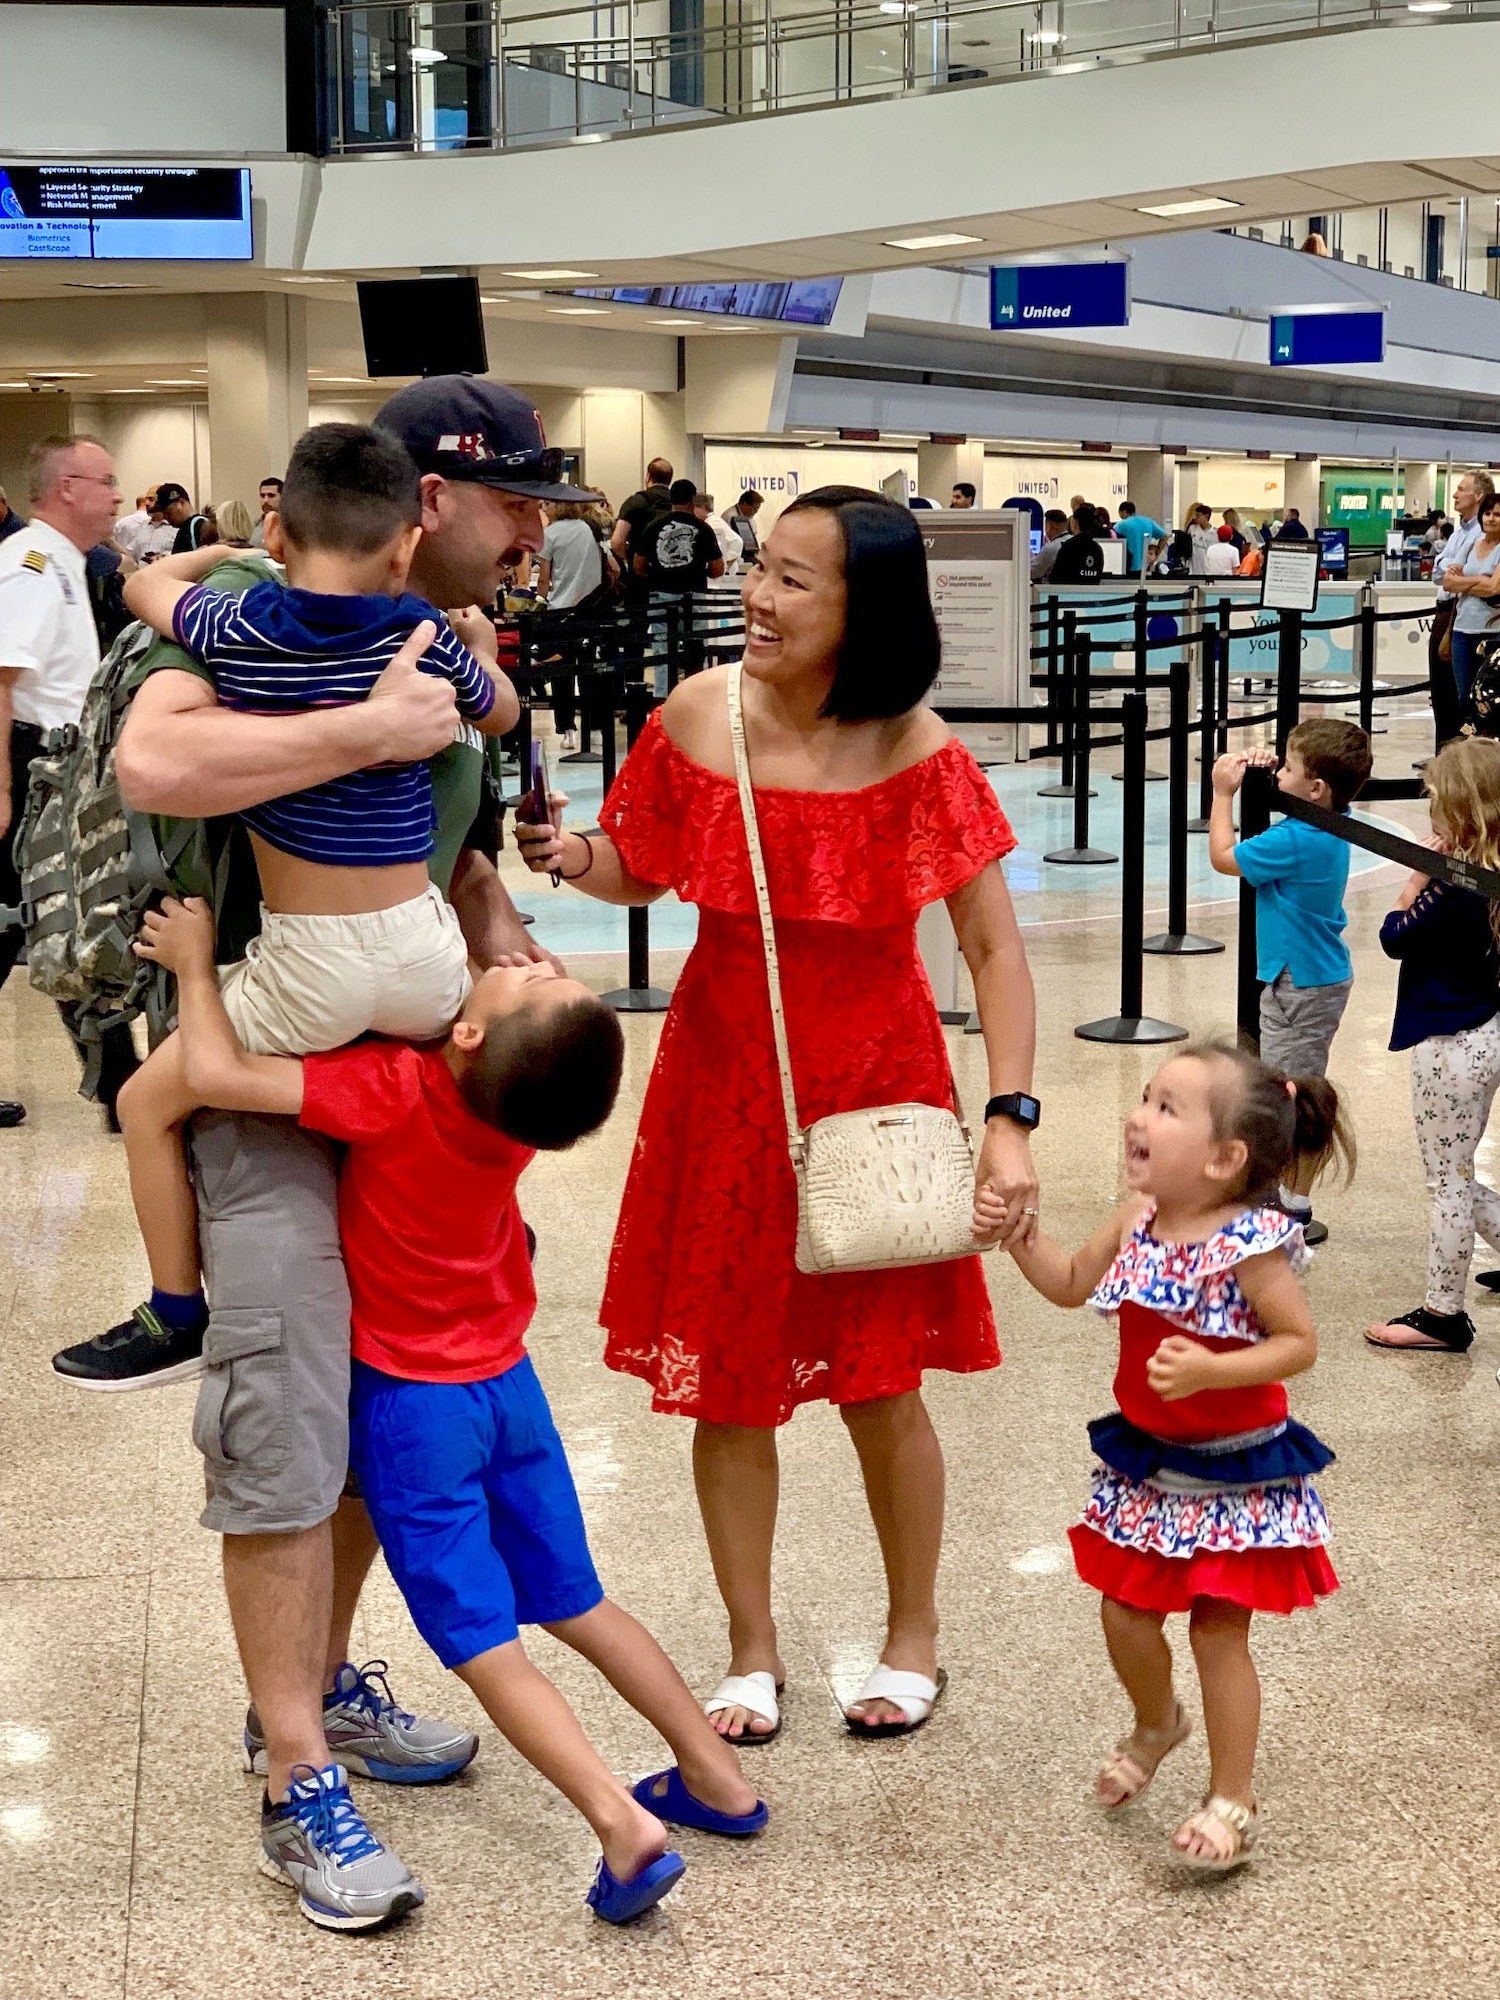 Tech. Sgt. Christopher Korpita, 419th Maintenance Squadron, is met by his wife, Khaliun, and three children after he returned home from a three-month deployment to the United Arab Emirates on July 19.